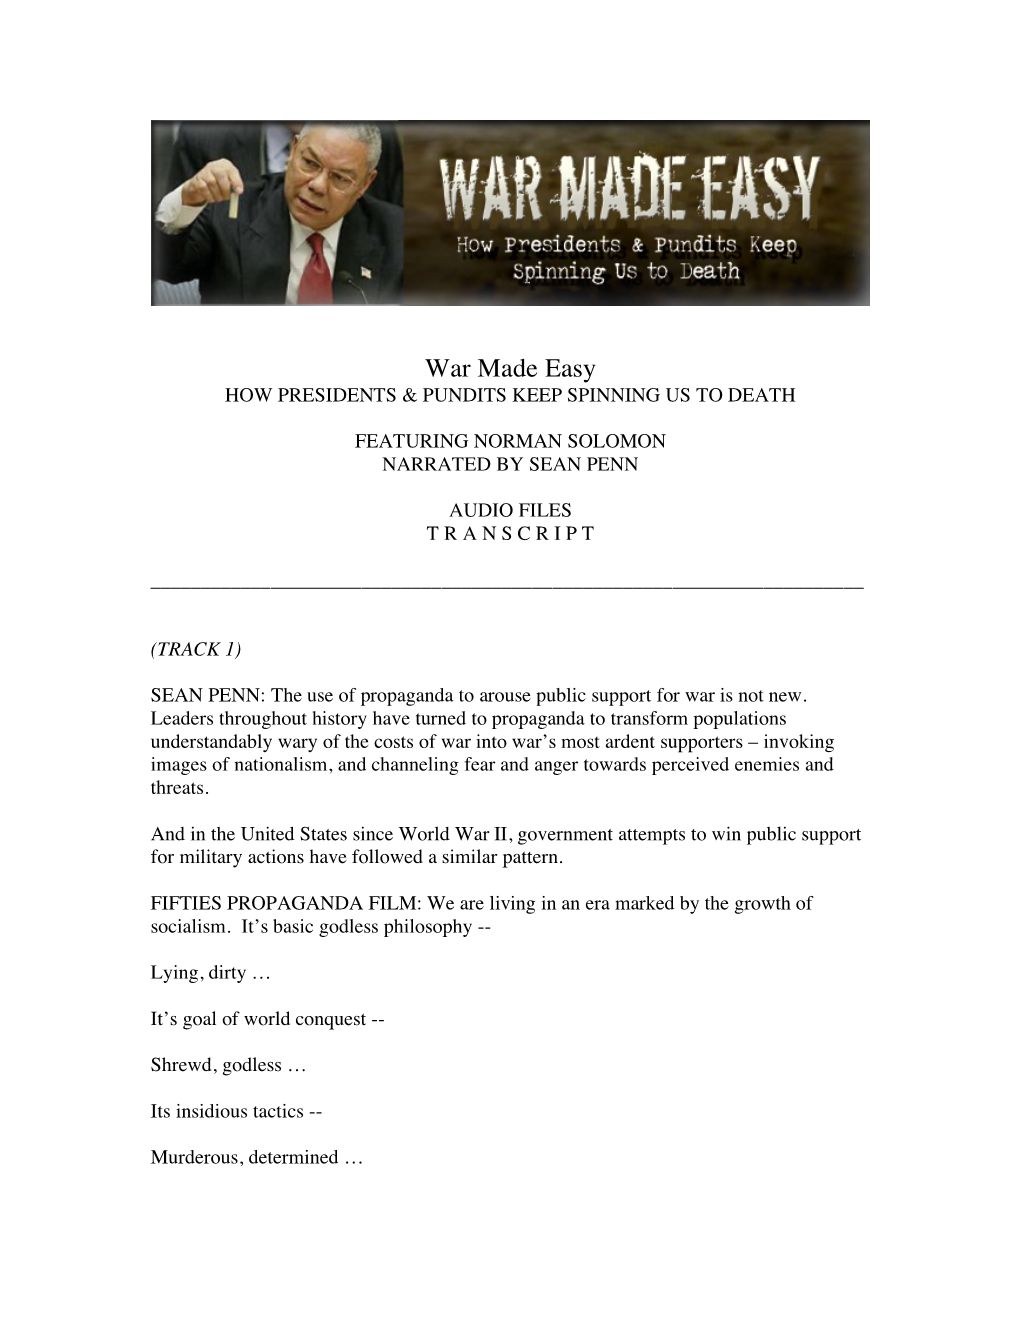 War Made Easy HOW PRESIDENTS & PUNDITS KEEP SPINNING US to DEATH